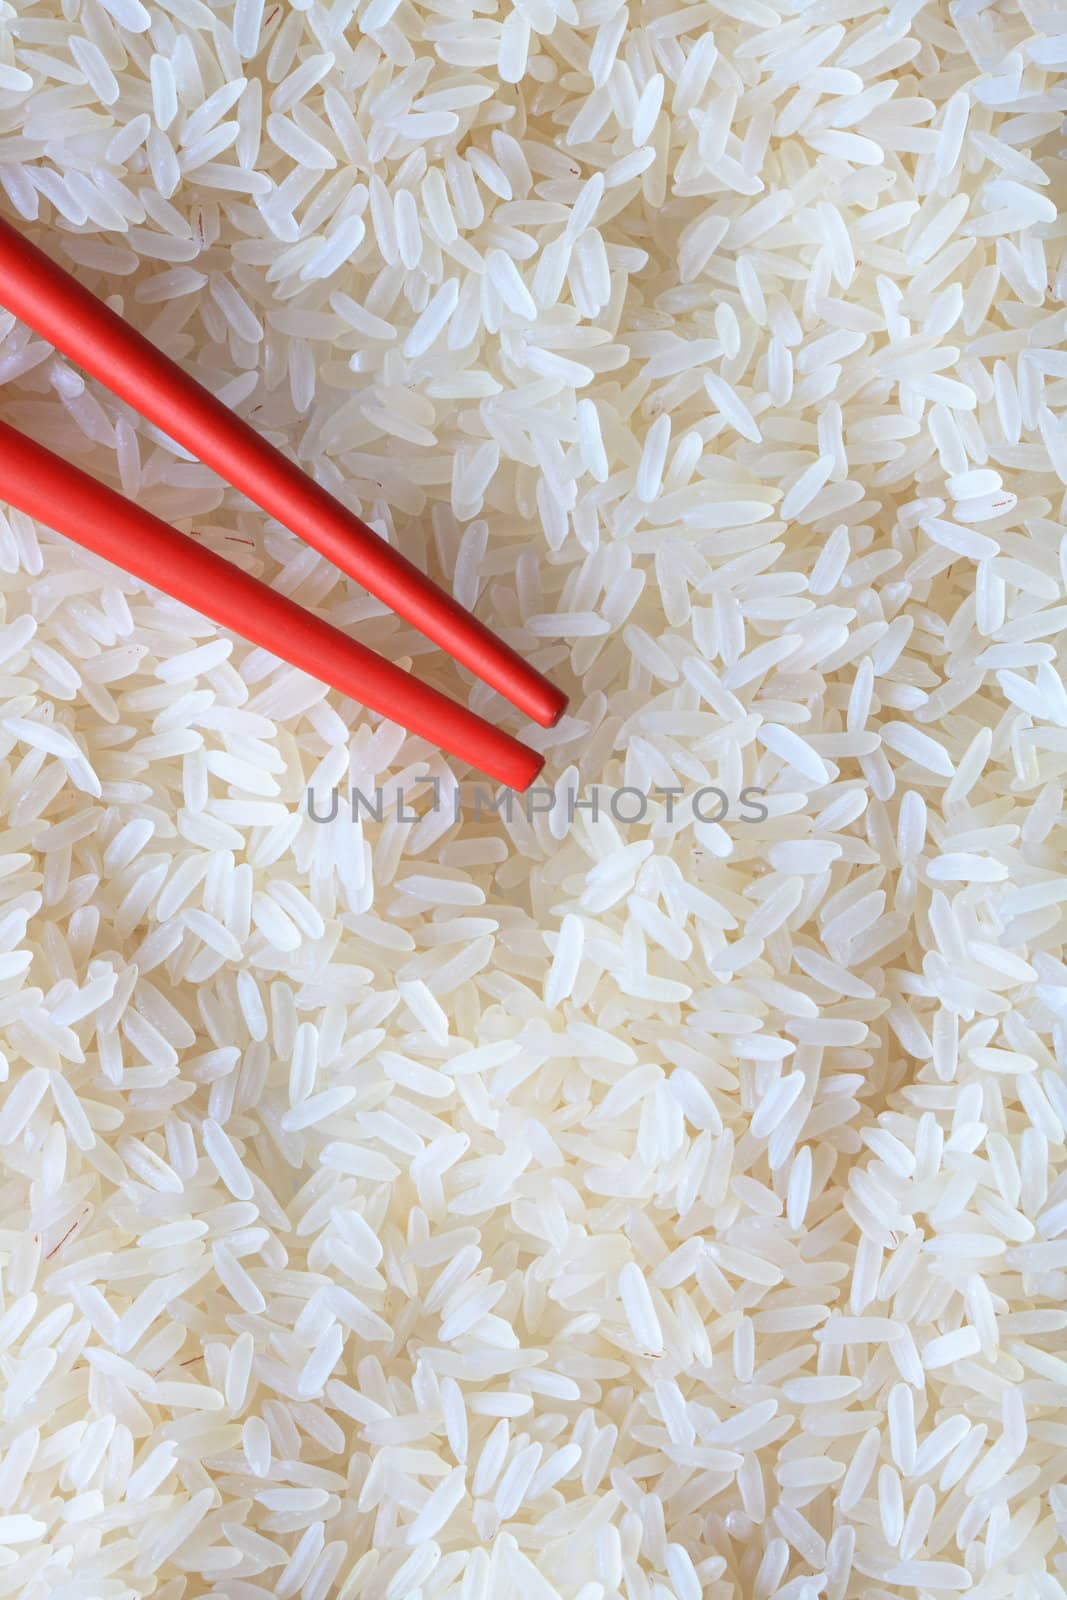 Red chopsticks lying on high quality long rice background